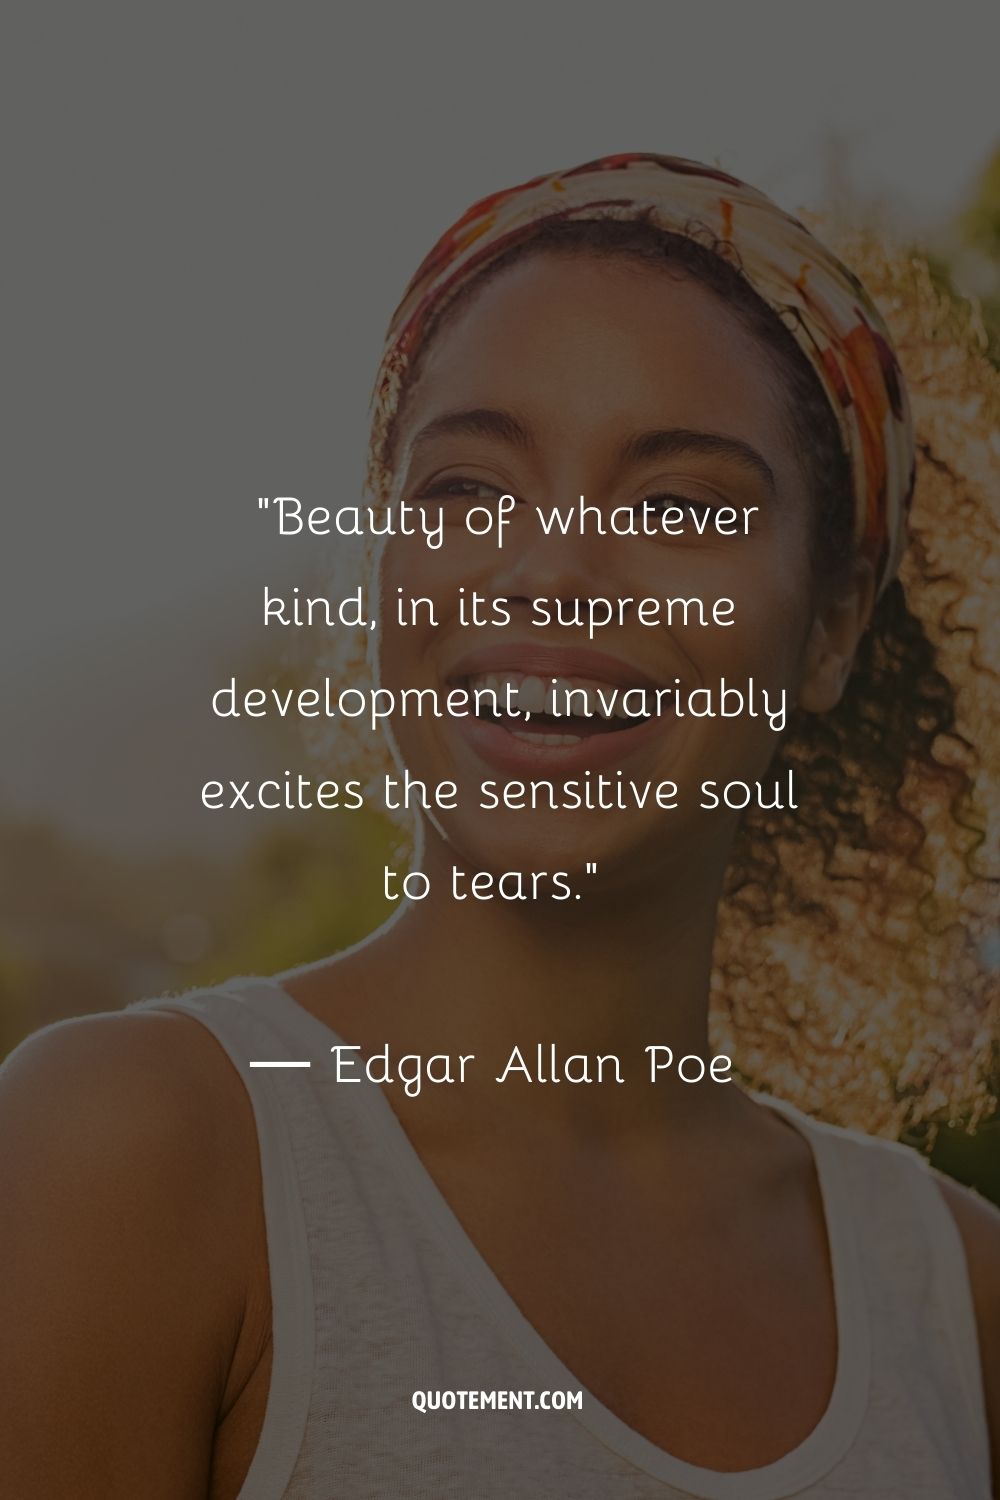 Beauty of whatever kind, in its supreme development, invariably excites the sensitive soul to tears.